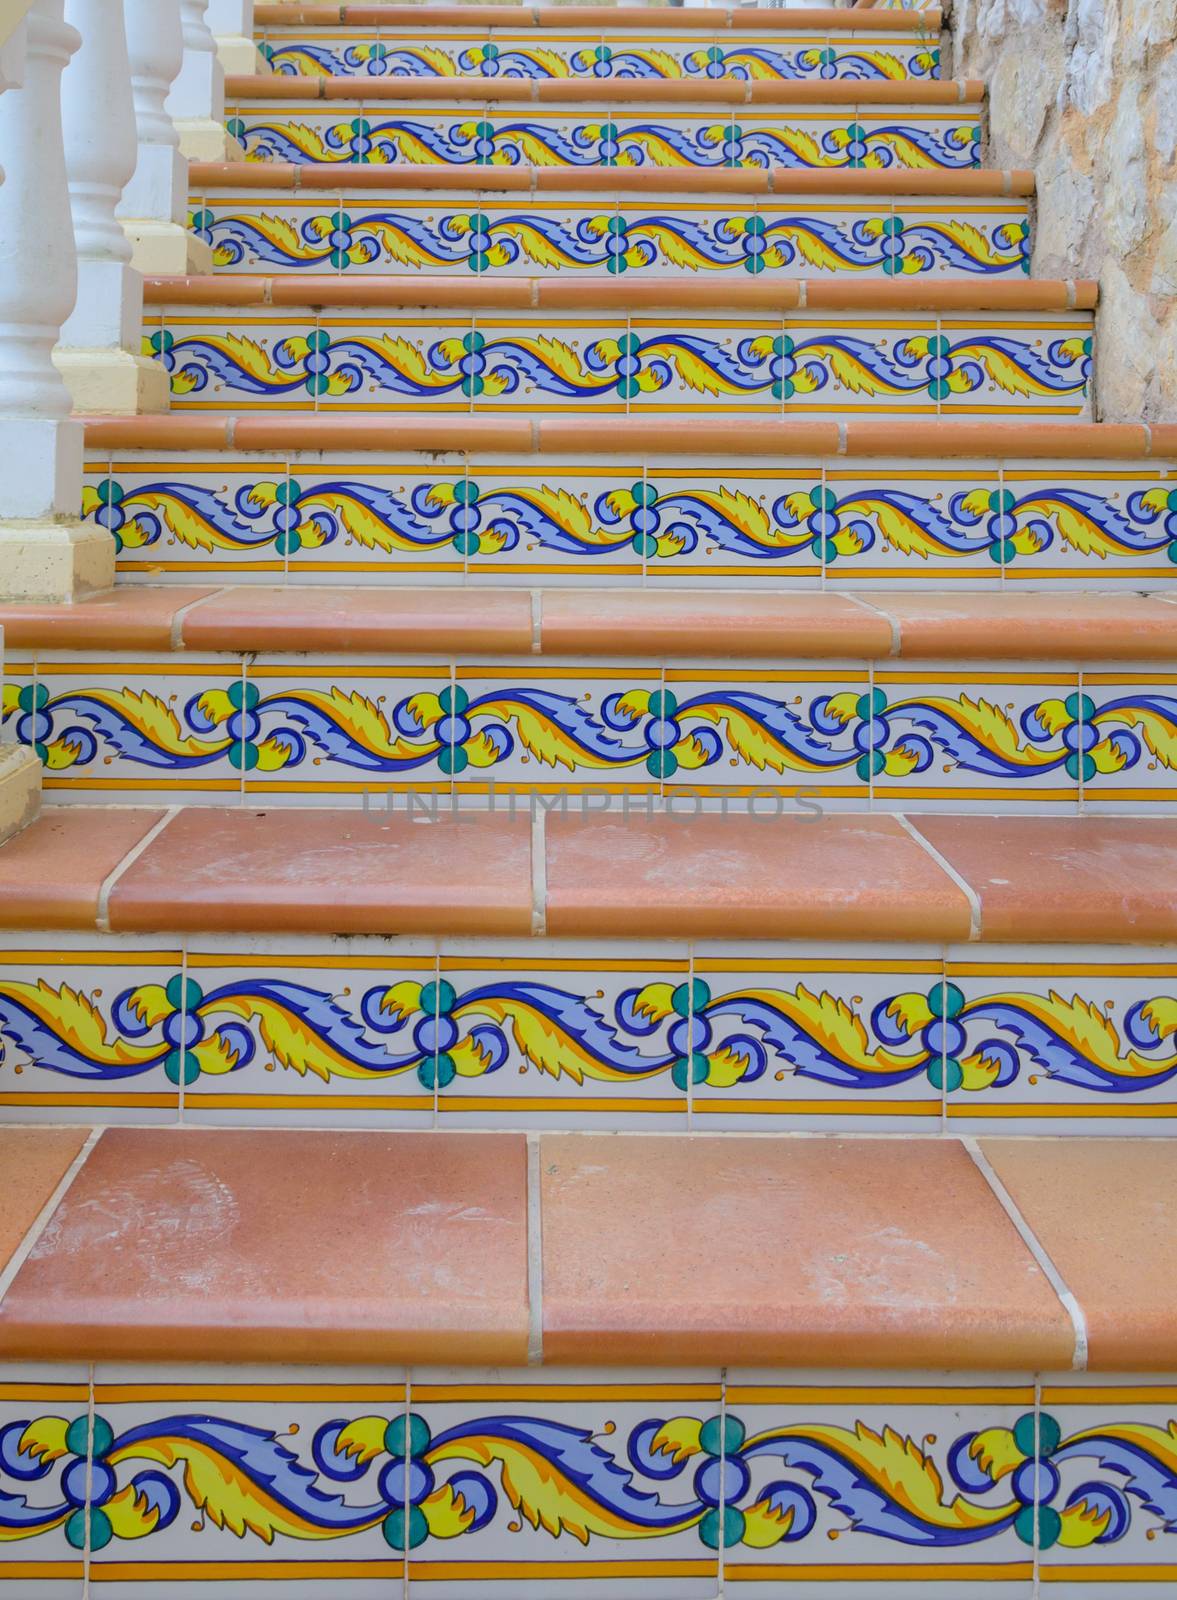 Staircase with pattern by ArtesiaWells